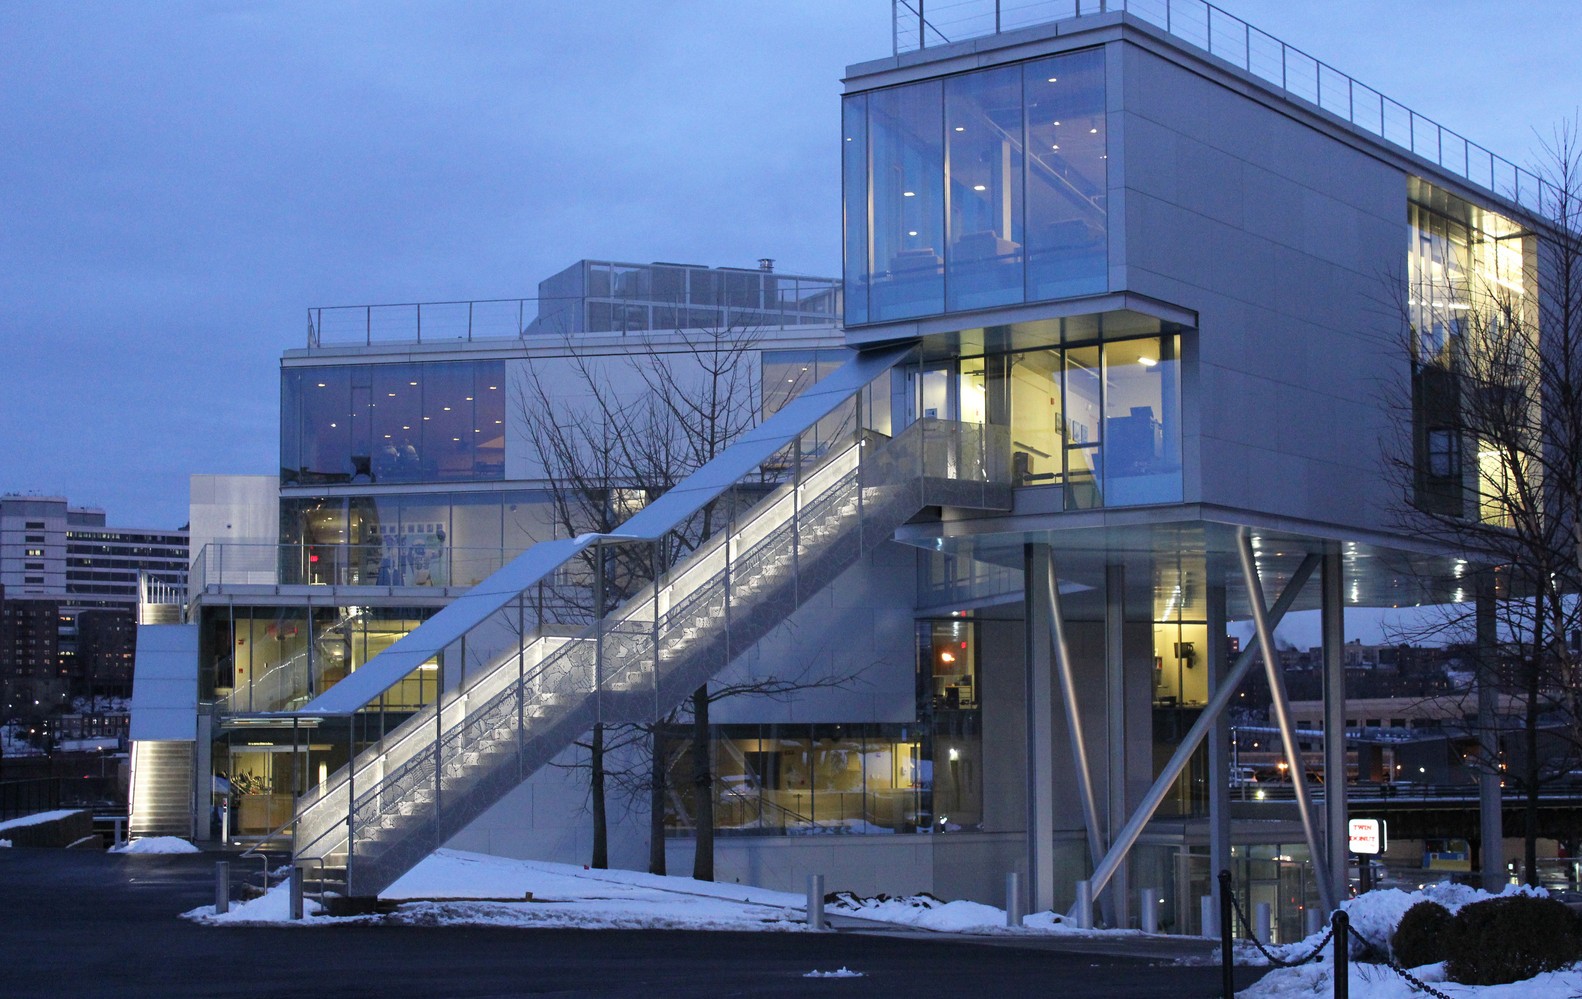 A rear view of the Campbell Sports Center at dusk.